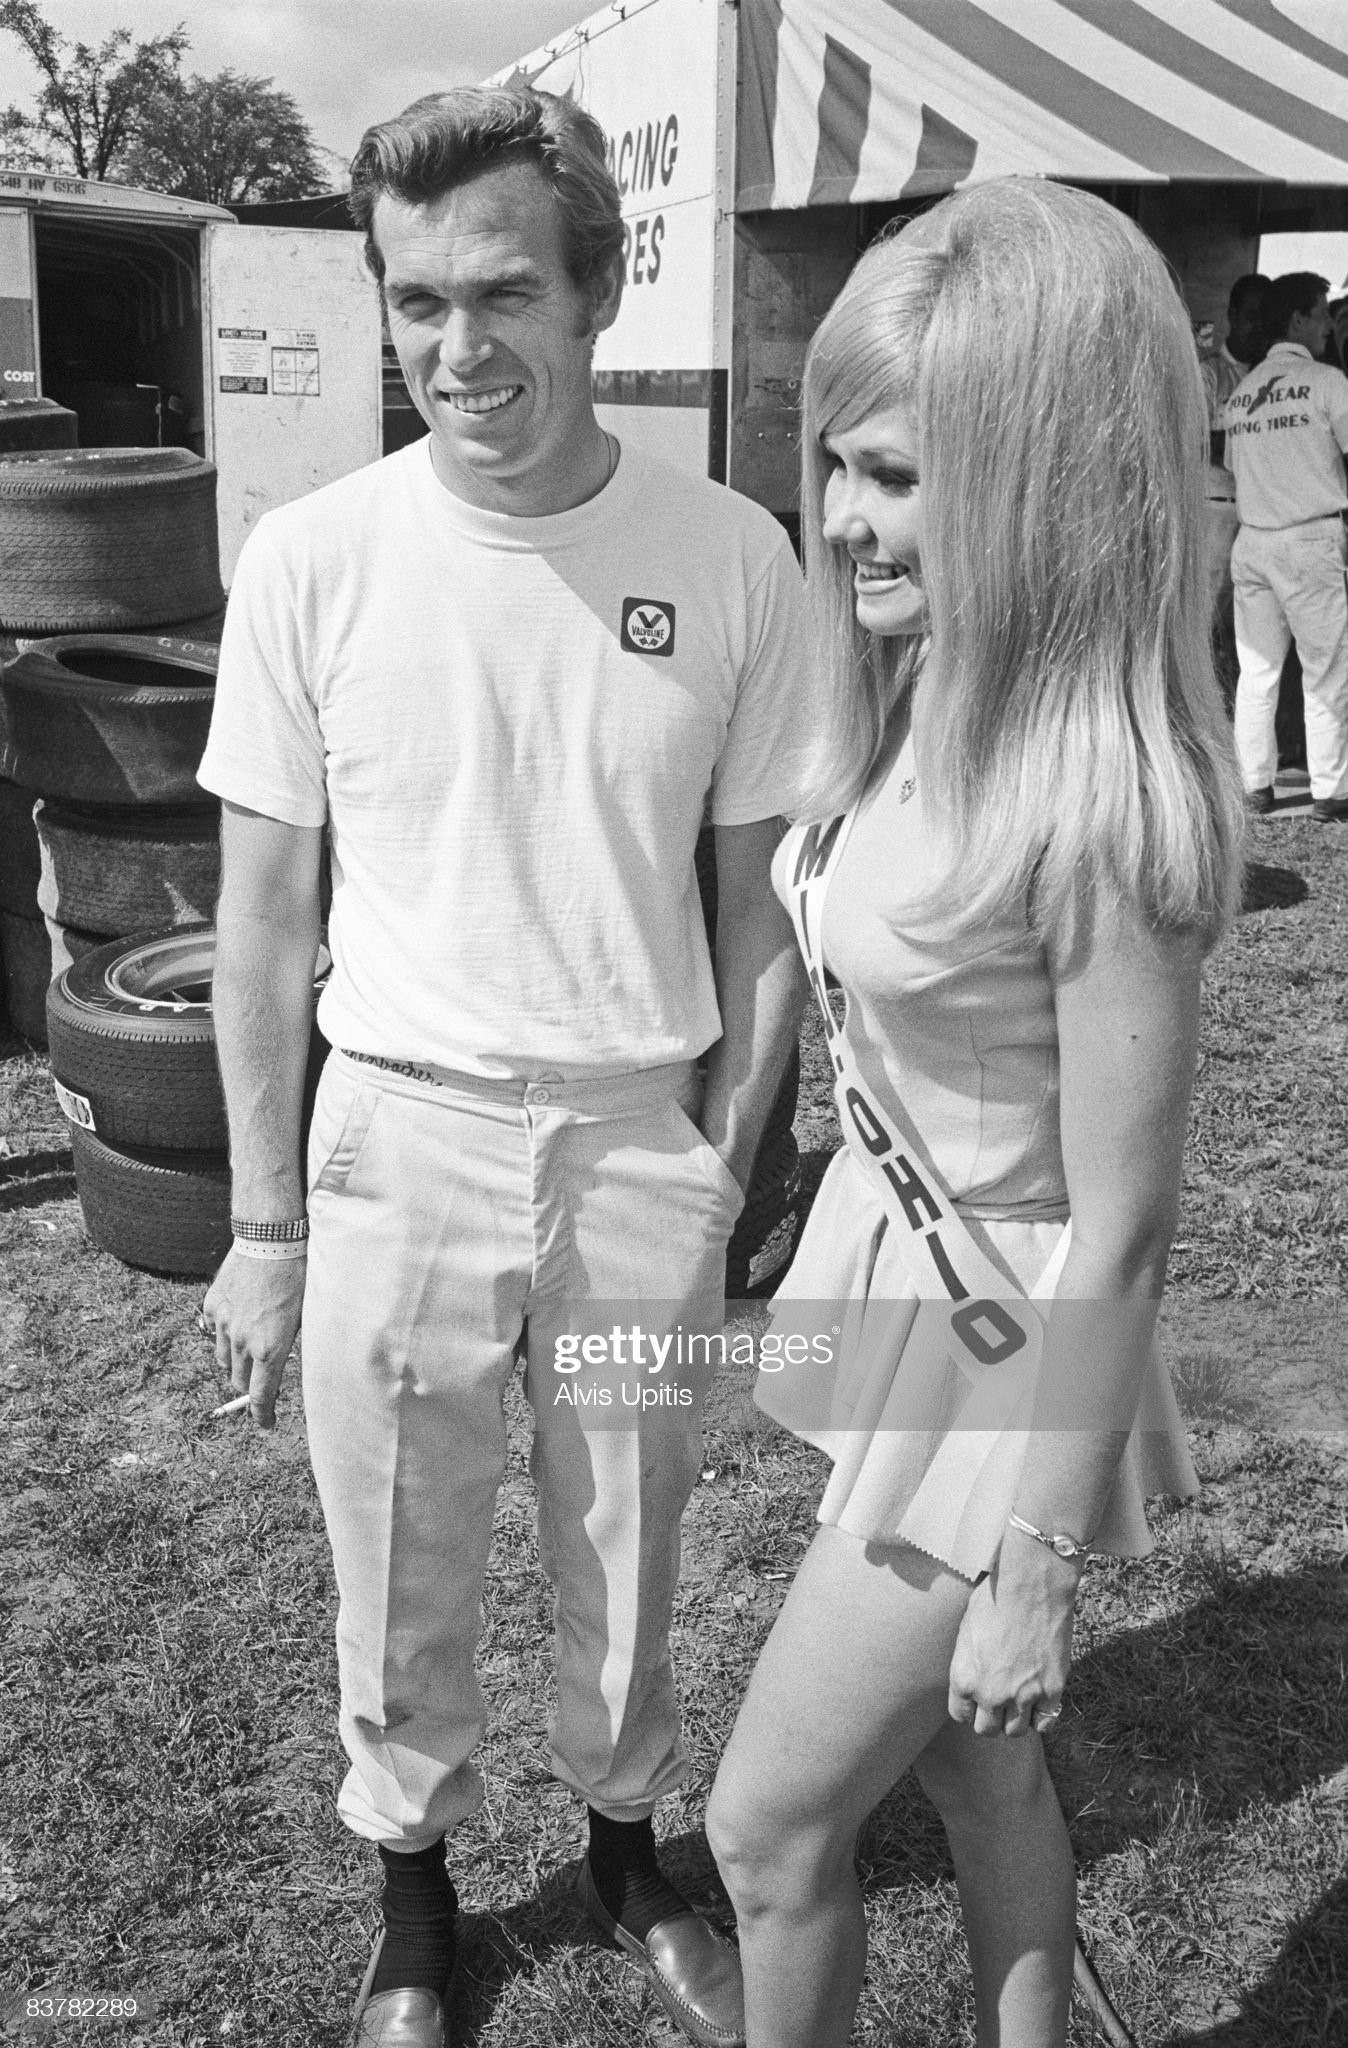 Lothar Motschenbacher beside race queen after winning the pole for the final USRRC race at Mid Ohio on August 18, 1968 in Lexington, Ohio.